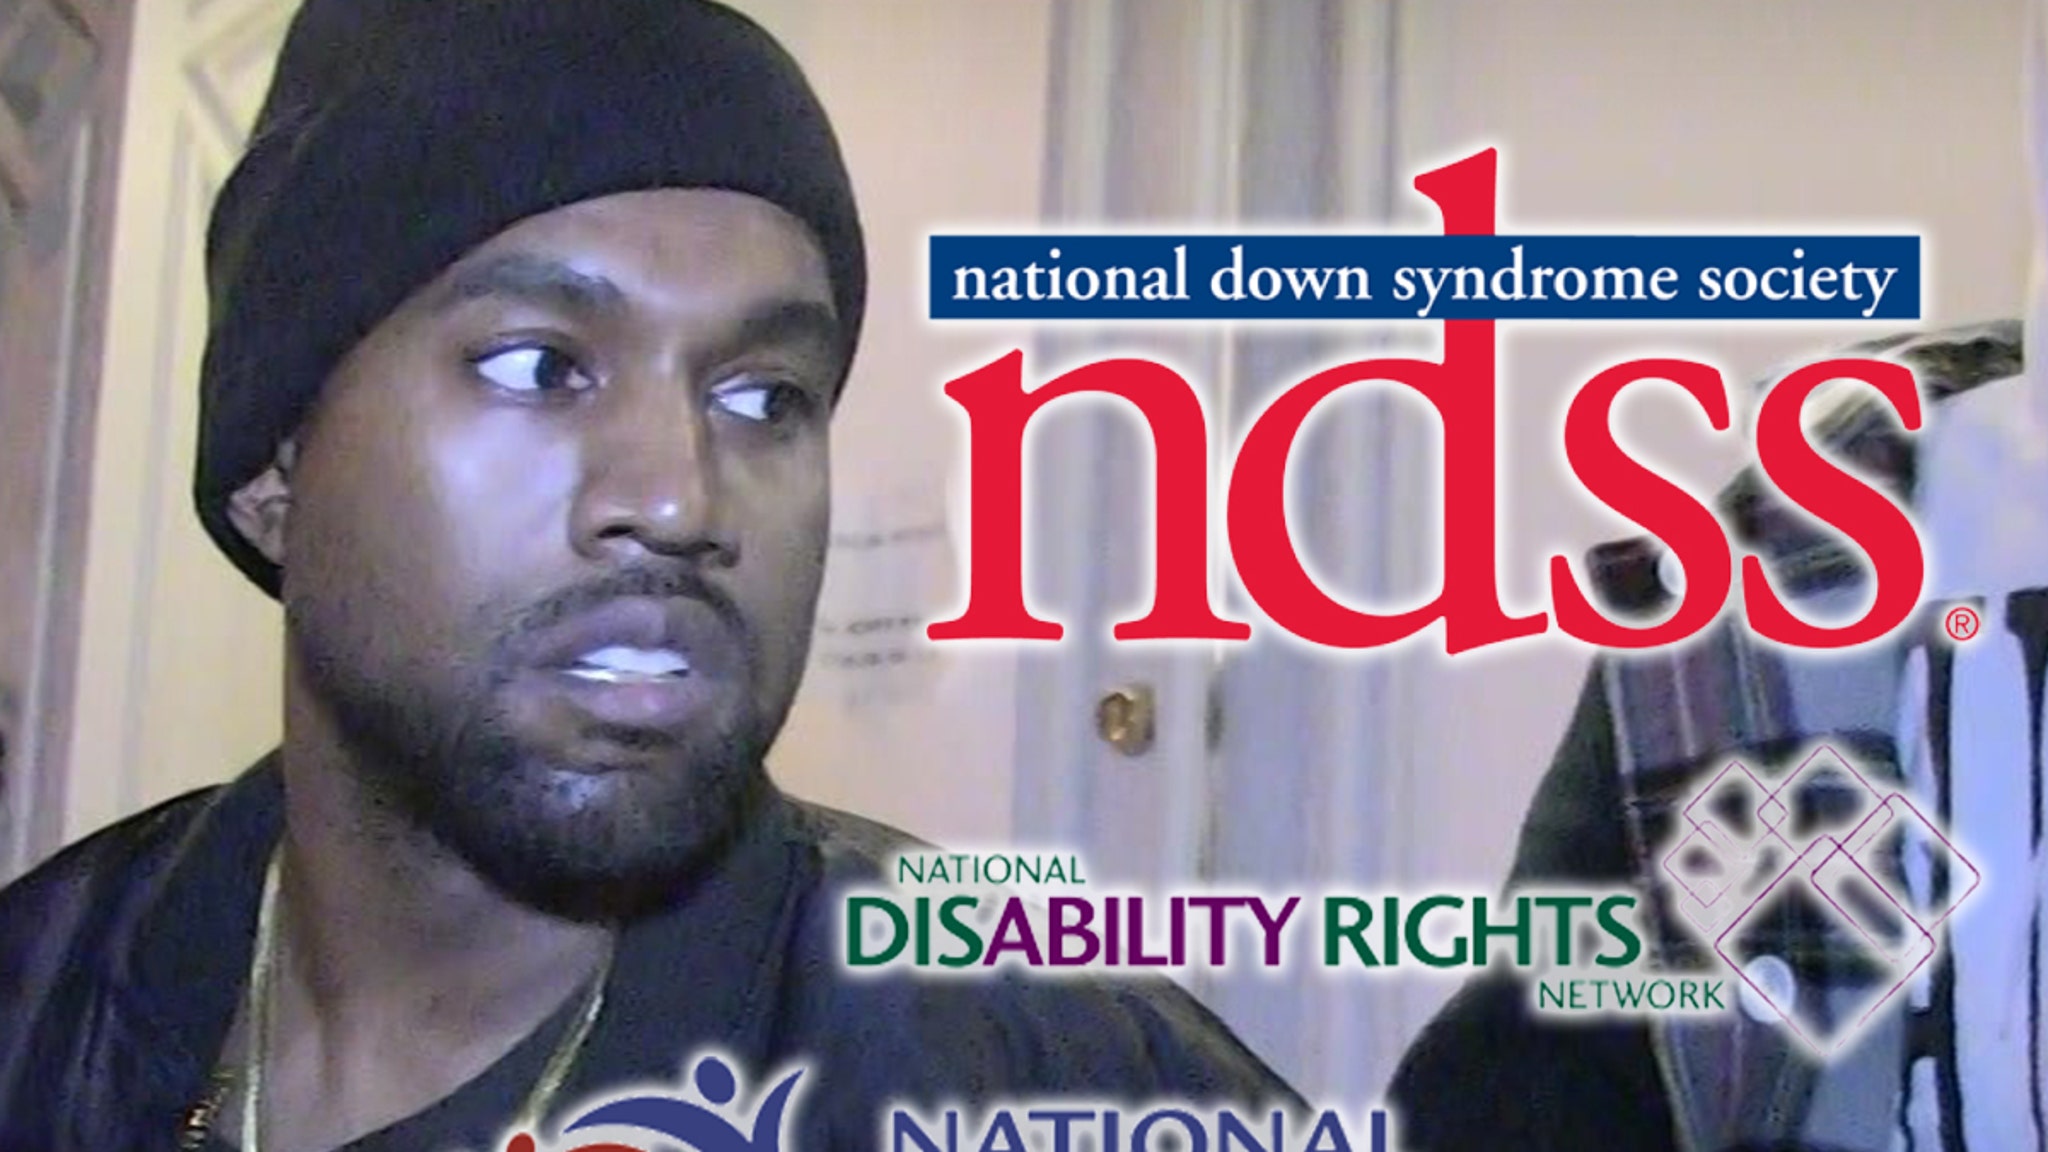 Kanye West Sentenced for Using R-Word by Down Syndrome and Disability Organizations